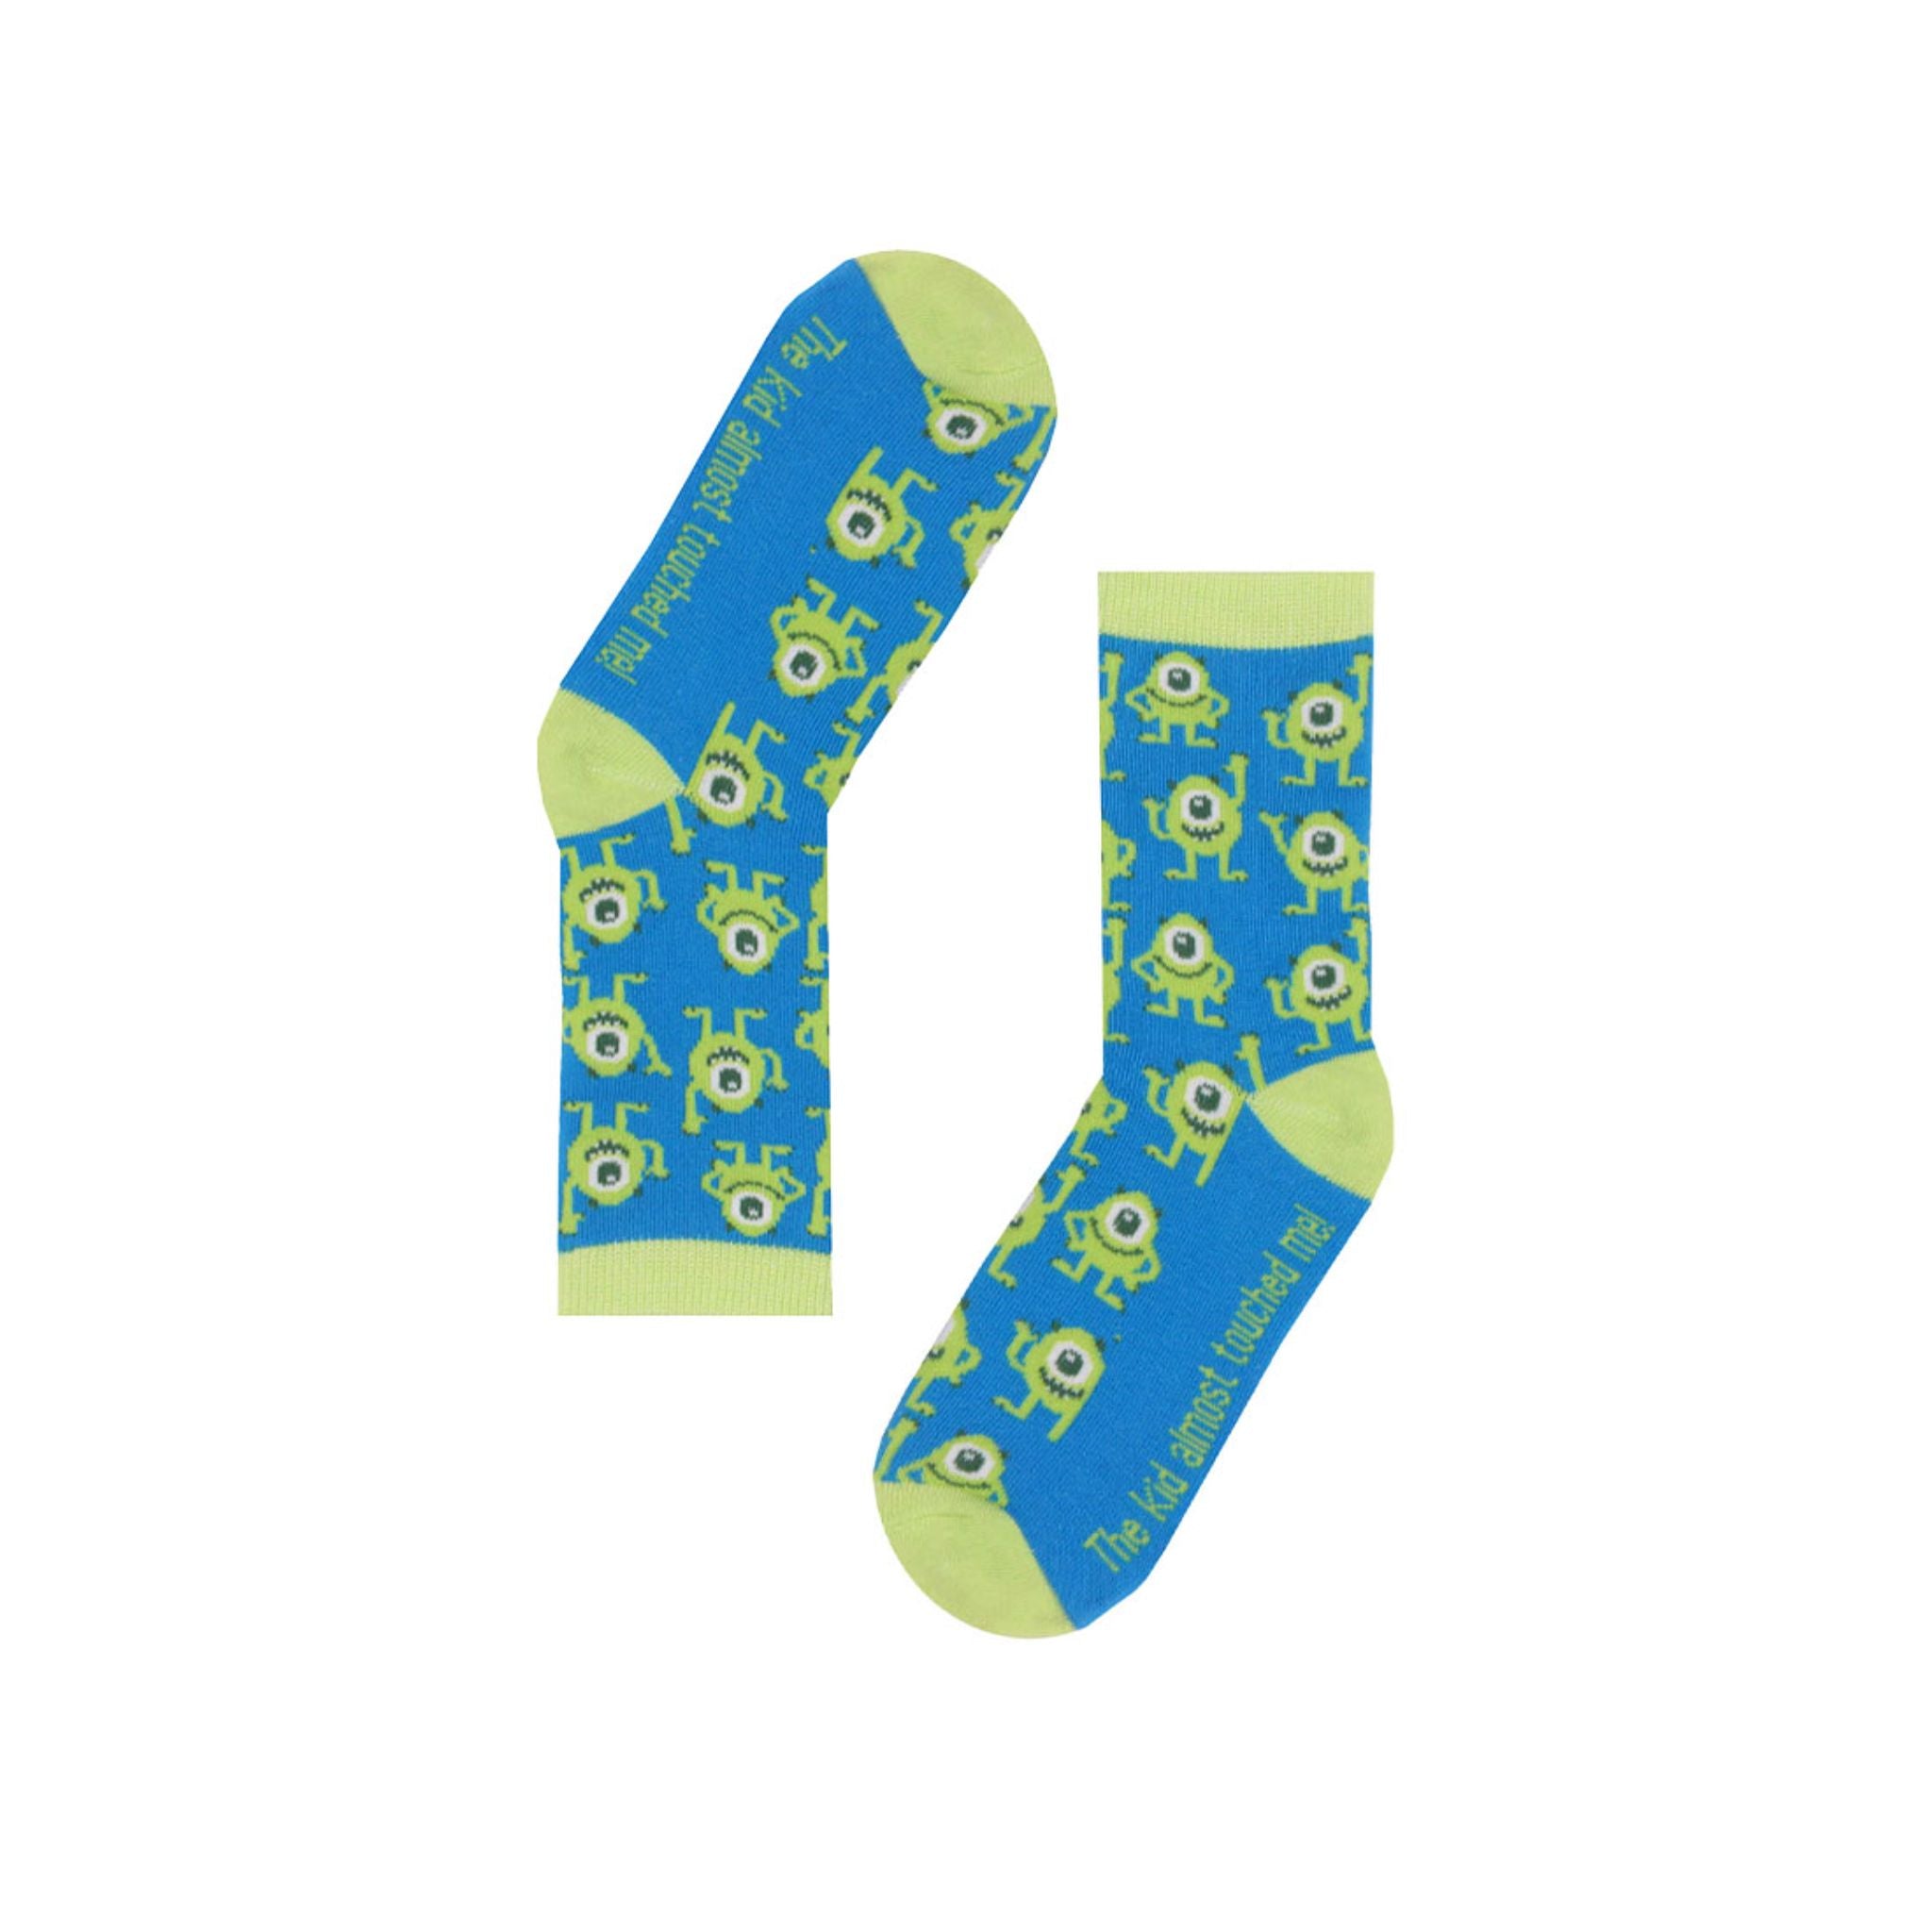 RAD RUSSEL Mikey Kids Socks - Ages 2 to 7 - Blue